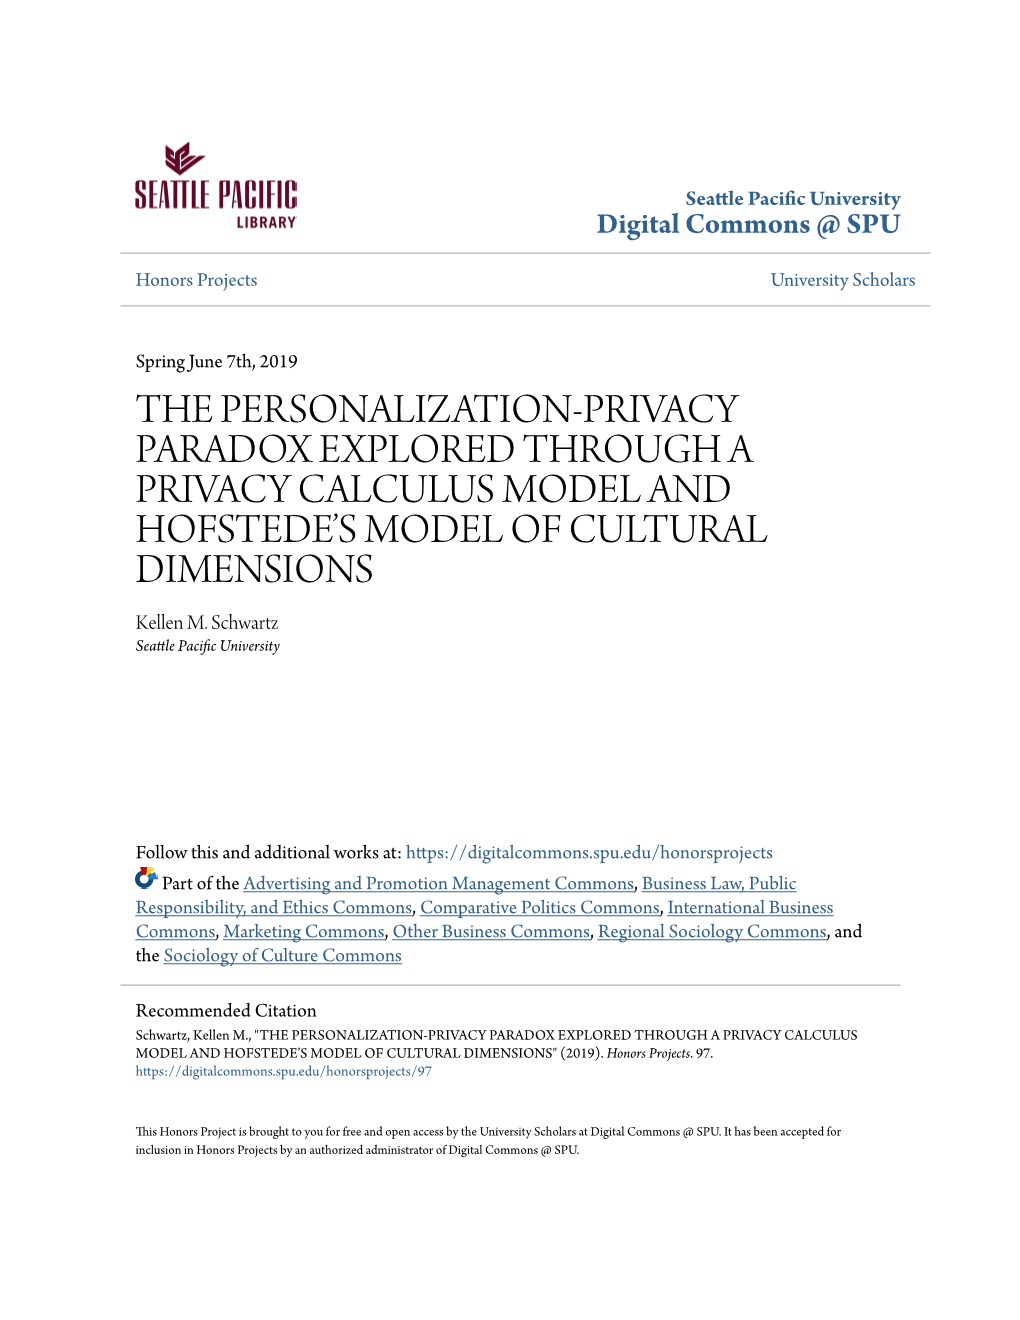 THE PERSONALIZATION-PRIVACY PARADOX EXPLORED THROUGH a PRIVACY CALCULUS MODEL and HOFSTEDE’S MODEL of CULTURAL DIMENSIONS Kellen M